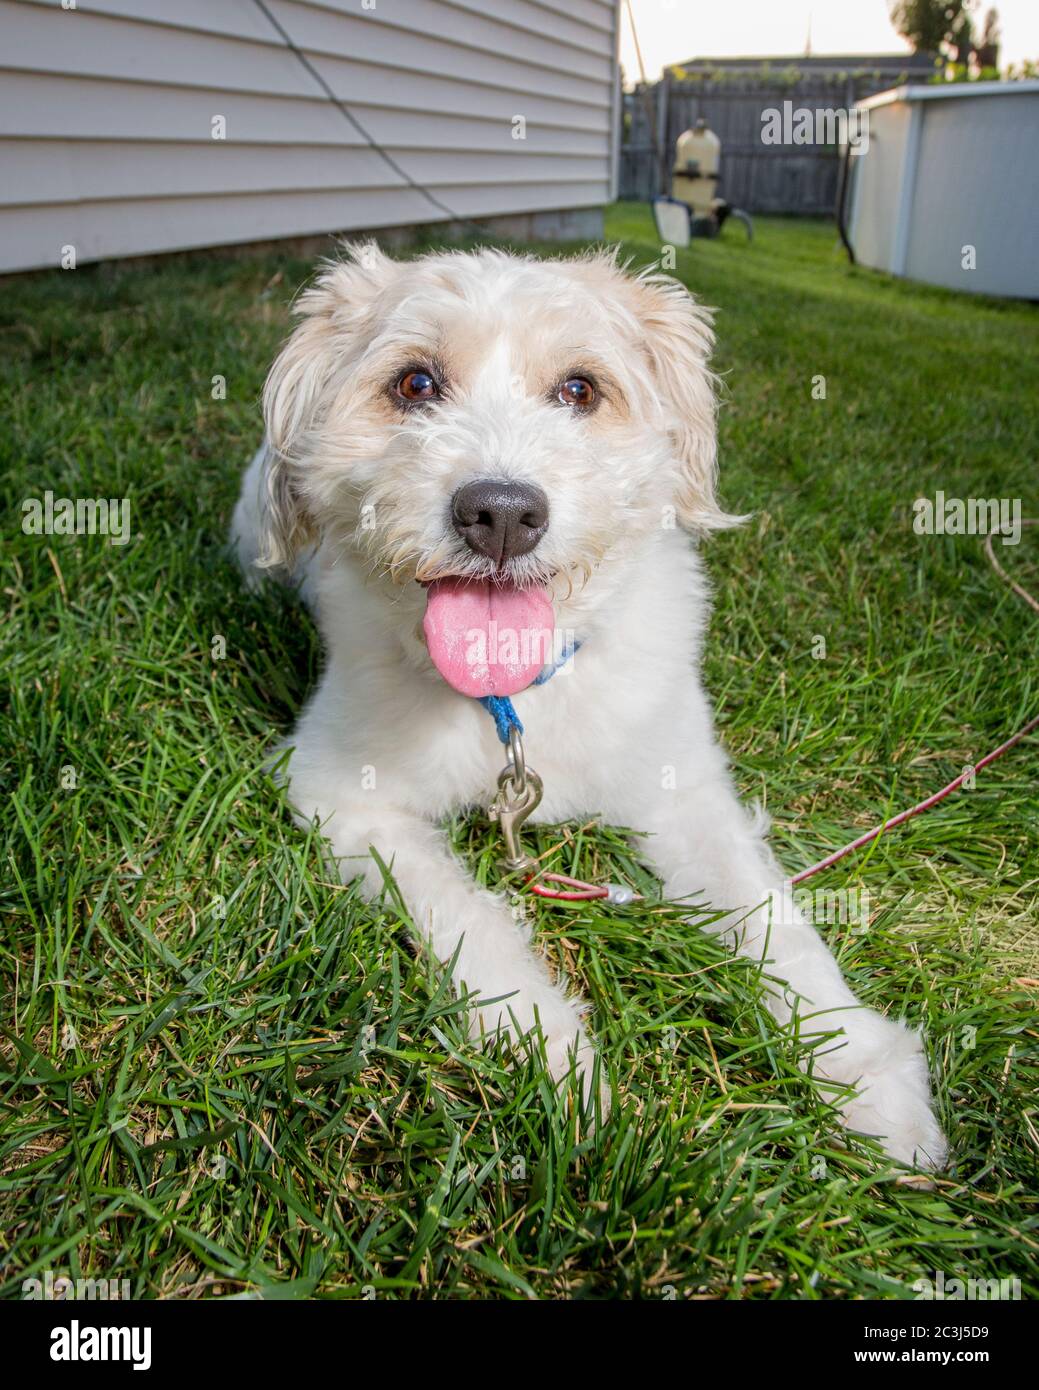 Fluffy white dog sitting in the grass Stock Photo